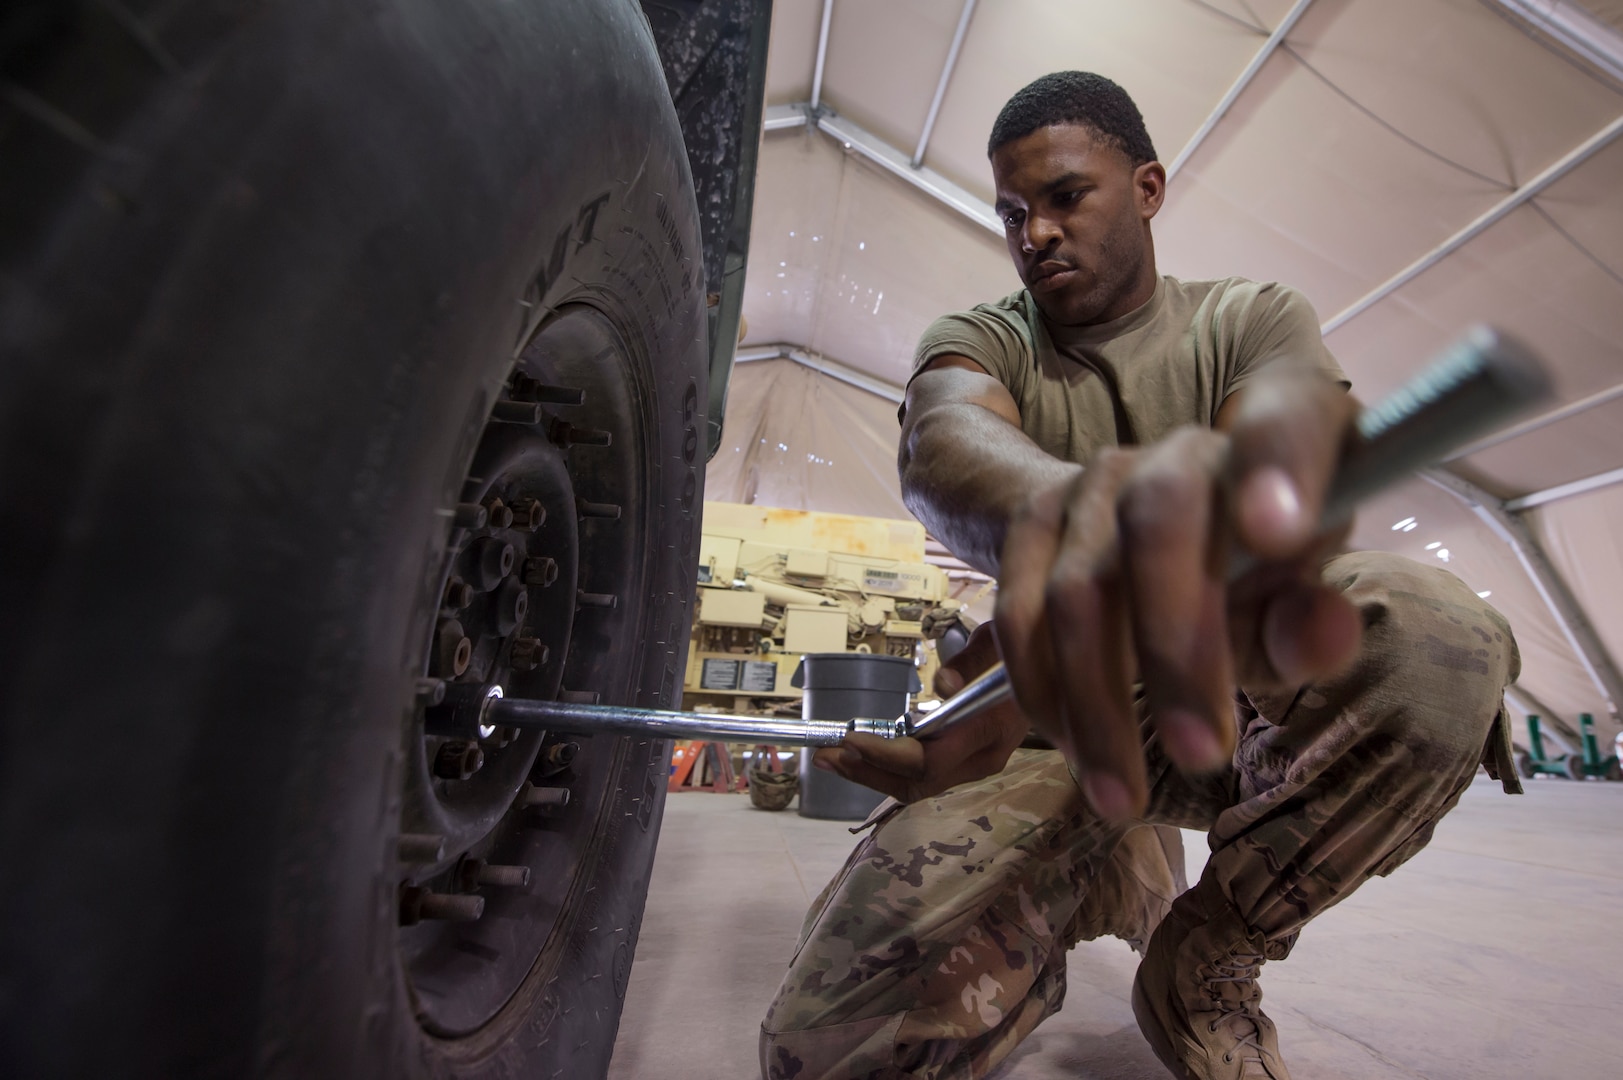 U.S. Army Spc. Jaylyn Wilson Echo Company, 1st Battalion, 43rd Air Defense Artillery (ADA) Battalion, 11th ADA Brigade wheeled vehicle mechanic, prepares a military vehicle’s tires for rotation as part of routine maintenance Jan. 28, 2019, at Al Udeid Air Base, Qatar. Soldiers of Echo Company perform mechanical work and repairs for various equipment and assets that support Al Udeid’s air defense capabilities, including surface-to-air missile systems. (U.S. Air Force photo by Tech. Sgt. Christopher Hubenthal)